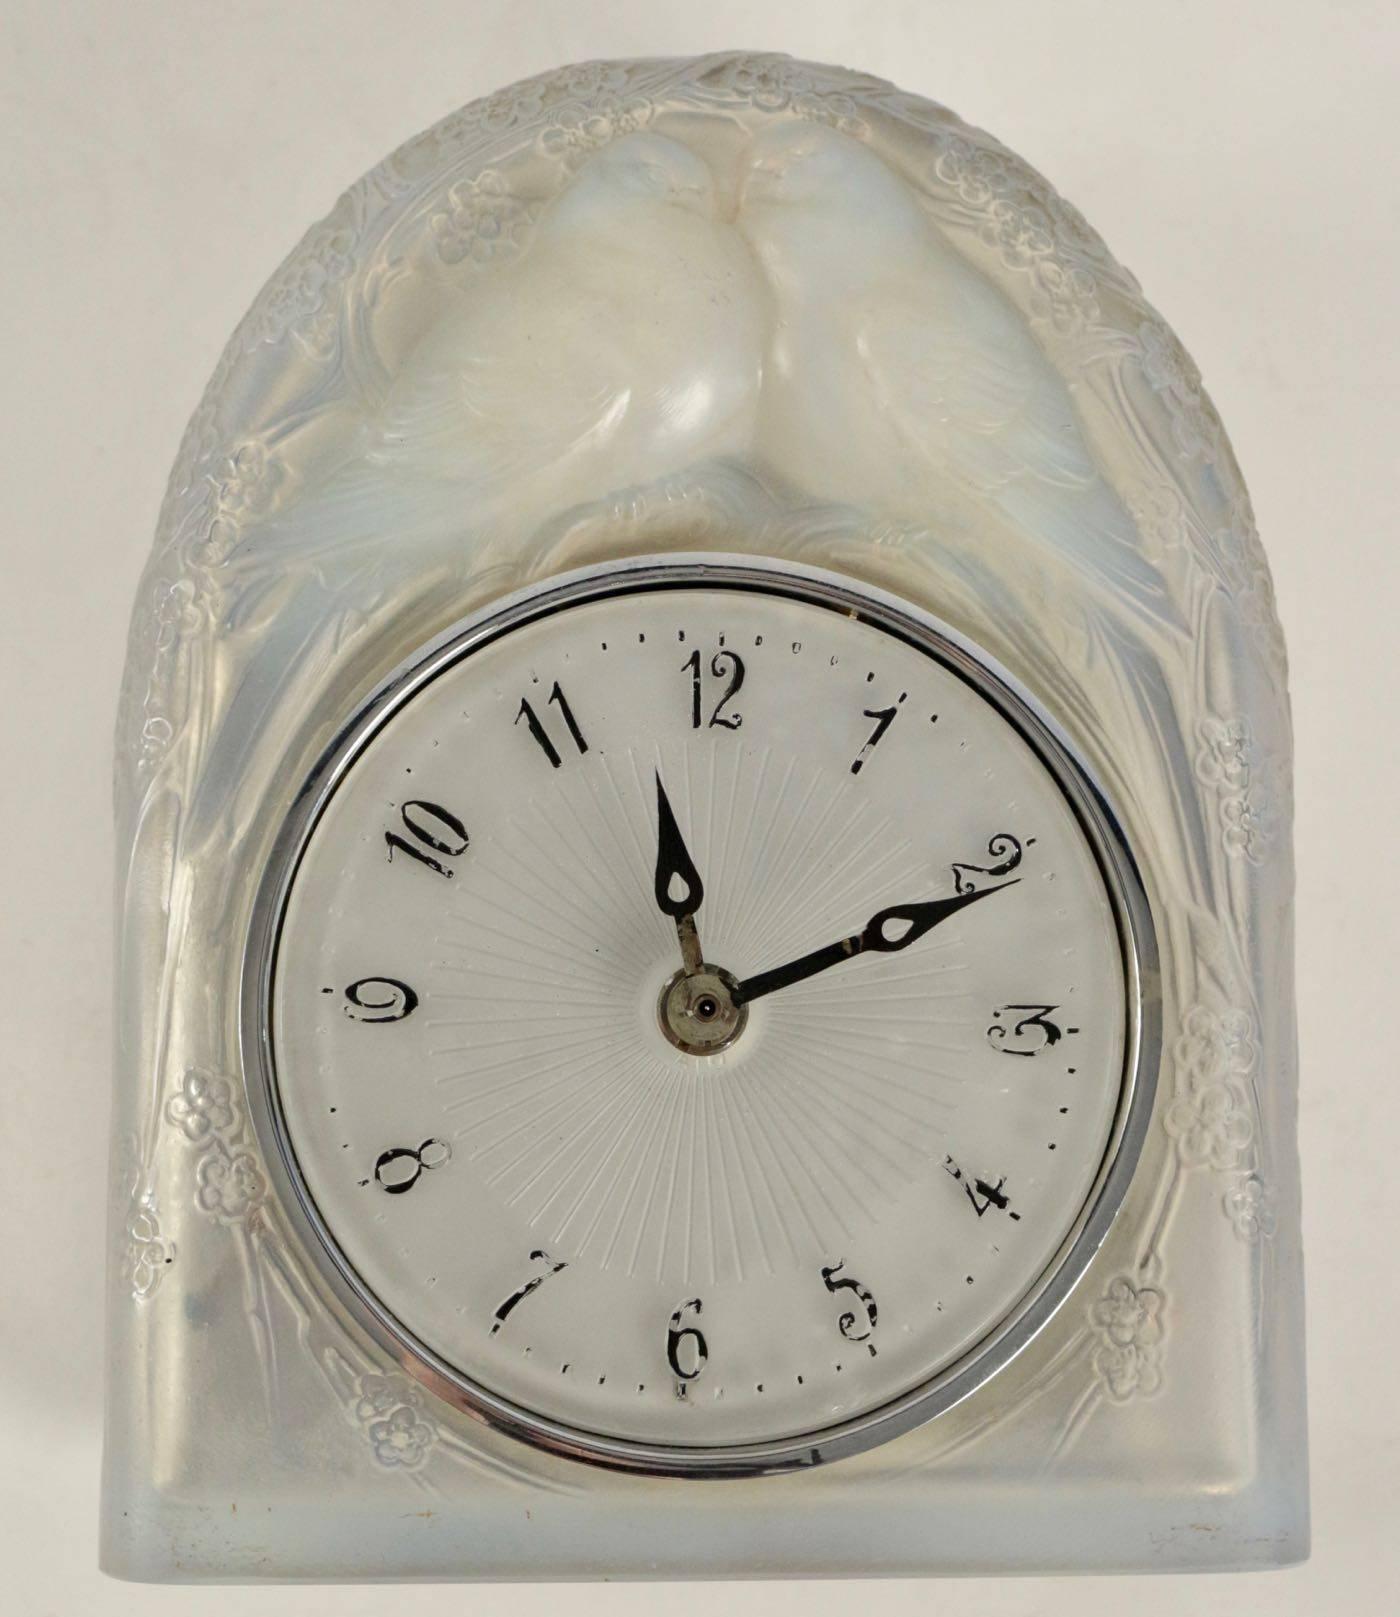 Deux colombes, a moulded-pressed opalescent and satiny glass mile-stone clock 

Glass dial with black enemailed number
 Two perched birds on branches and foliage motif under a dome shaped.
Signed R.Lalique, France.
Model created in